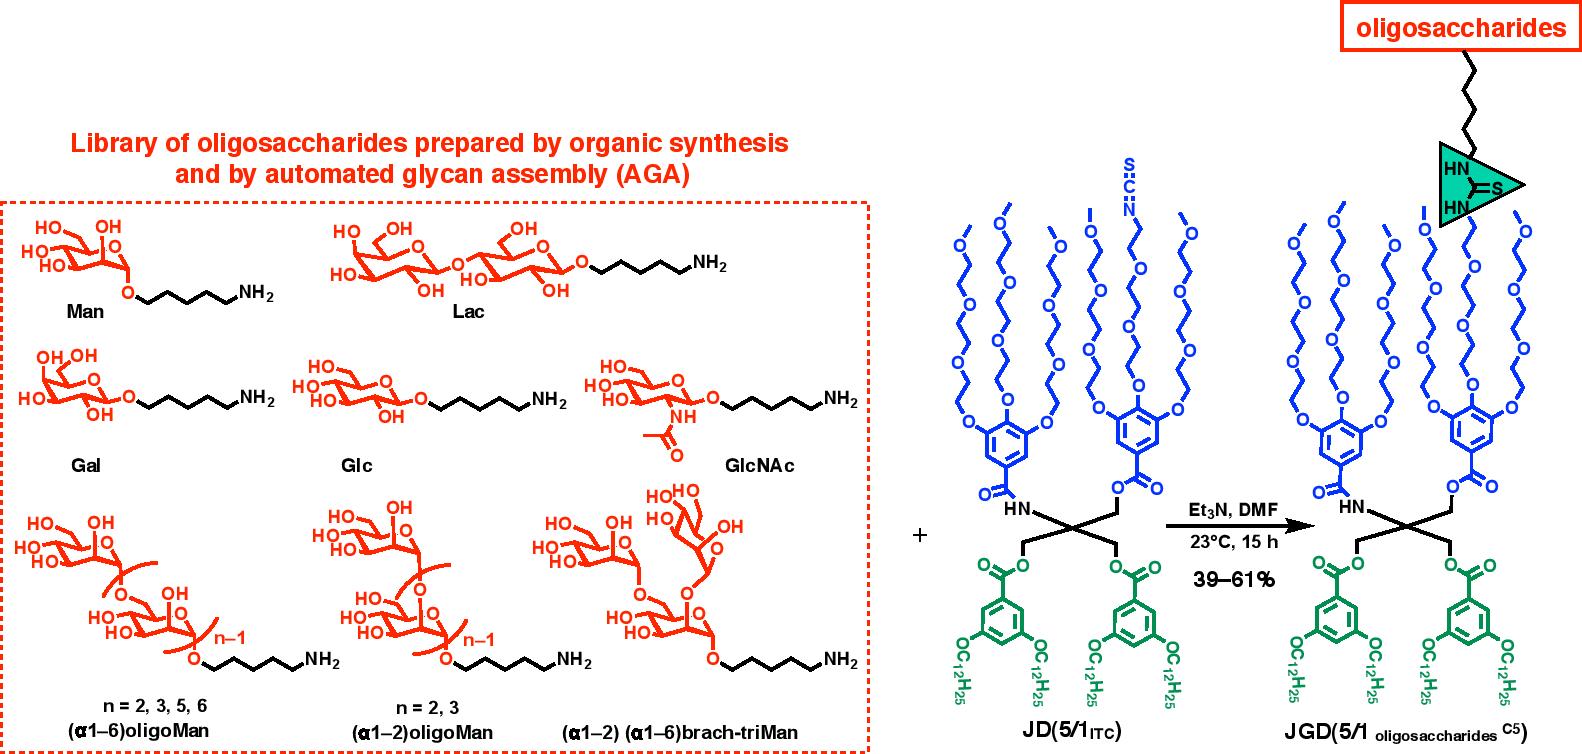 chemical diagrams on the left showing library of oligosaccharides prepared by organic synthesis and by automated glycan assembly (AGA) including Man, Lac, Gal, Glc, GlcNAc, and three types of oligoMan, on the left are janus dendrimers (JD) showing a connection to oligosaccharides at hte top. 